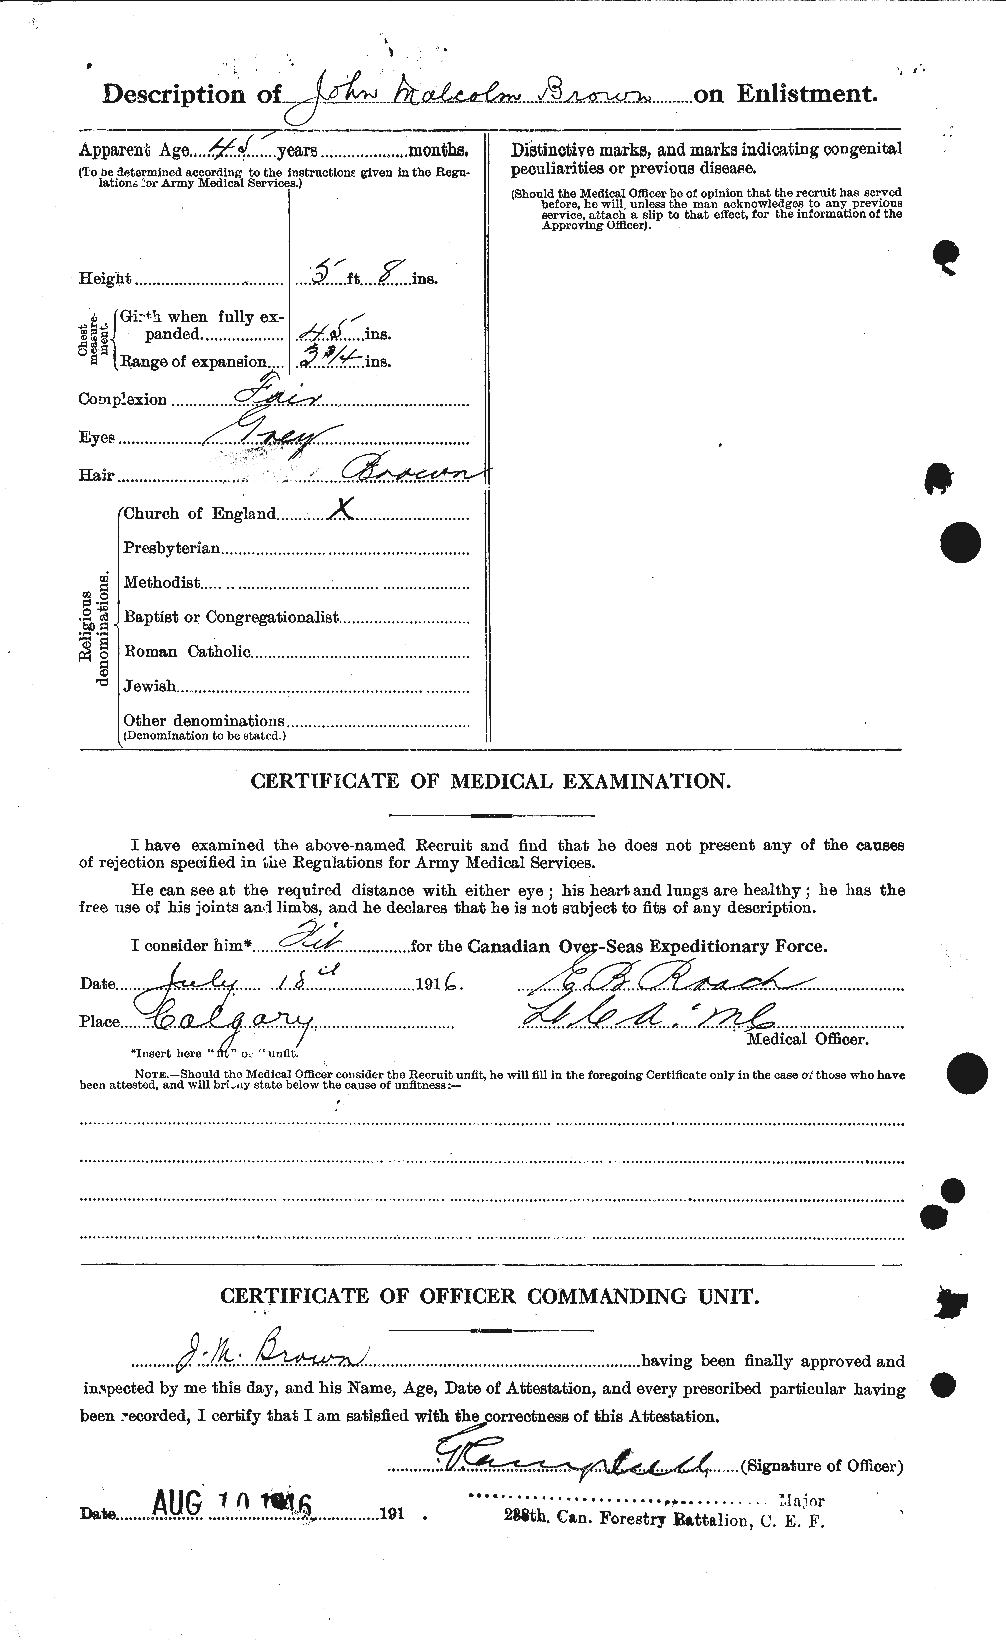 Personnel Records of the First World War - CEF 265833b